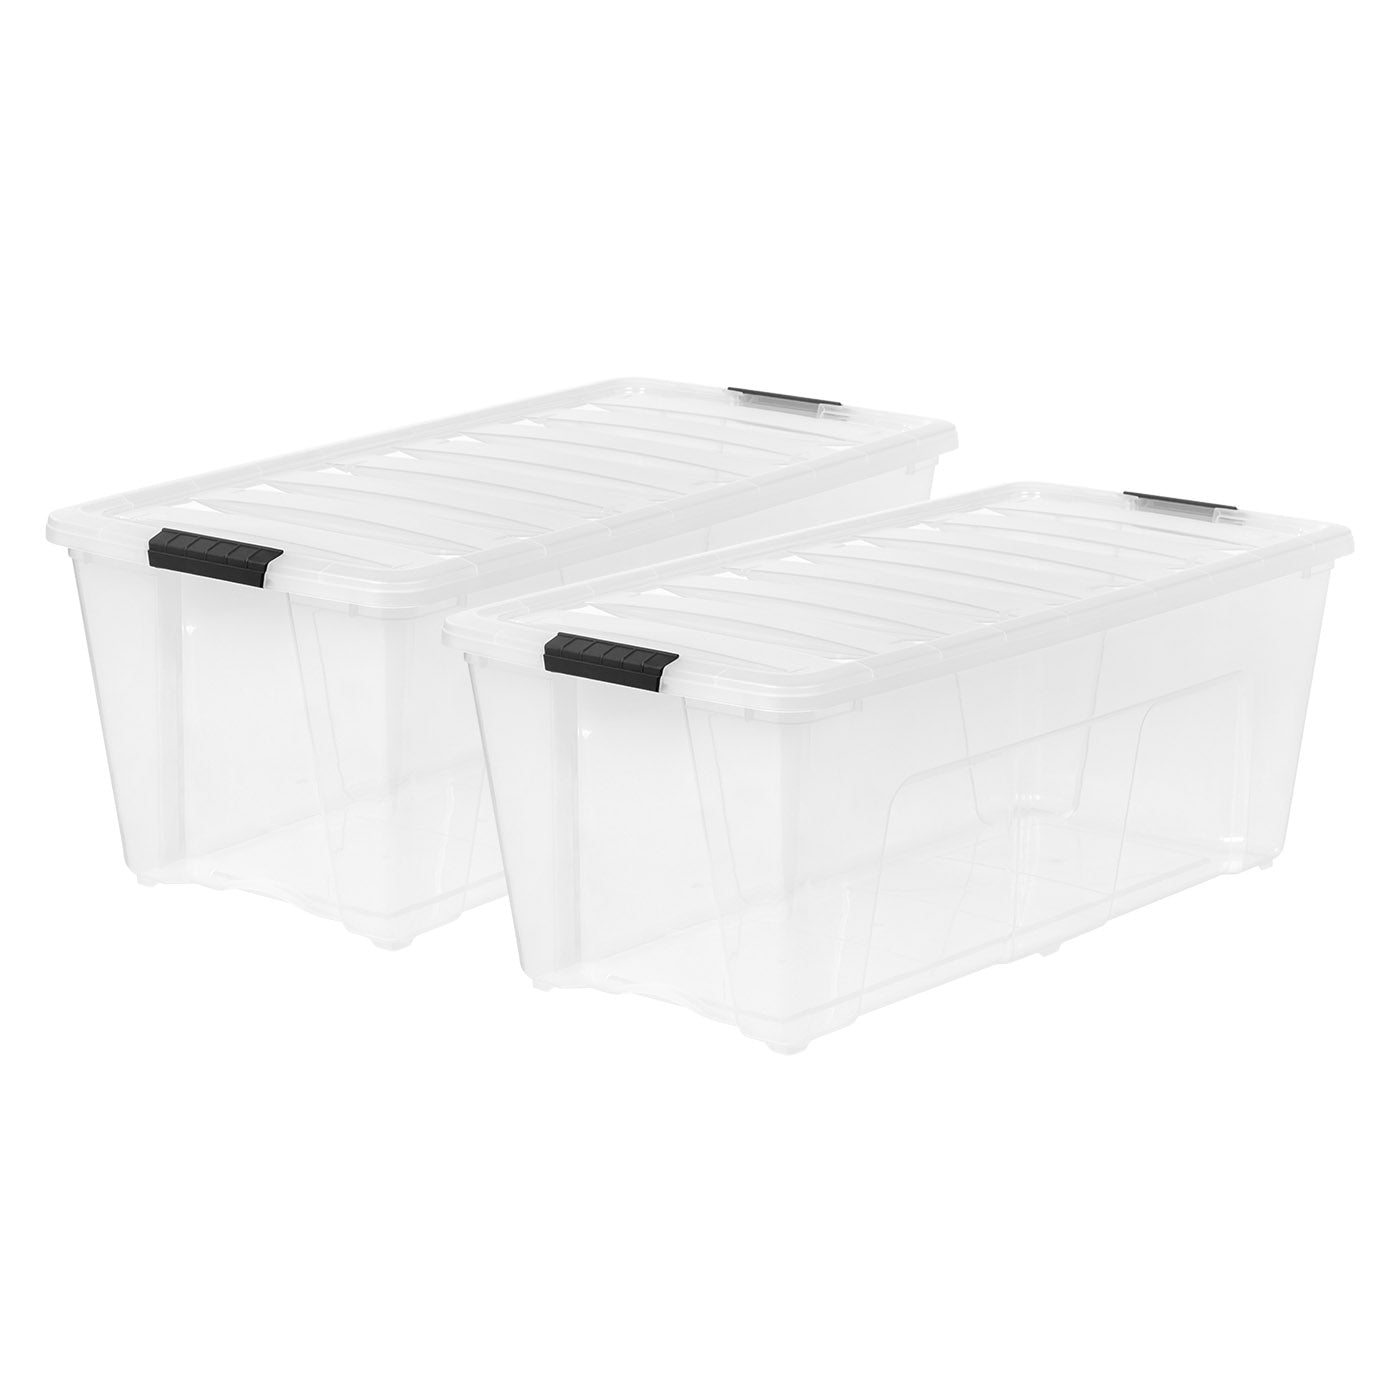 Iris USA 32 qt. Plastic Storage Bin Tote Organizing Container with Durable Lid and Secure Latching Buckles, Stackable and Nestable, 4 Pack, Black with